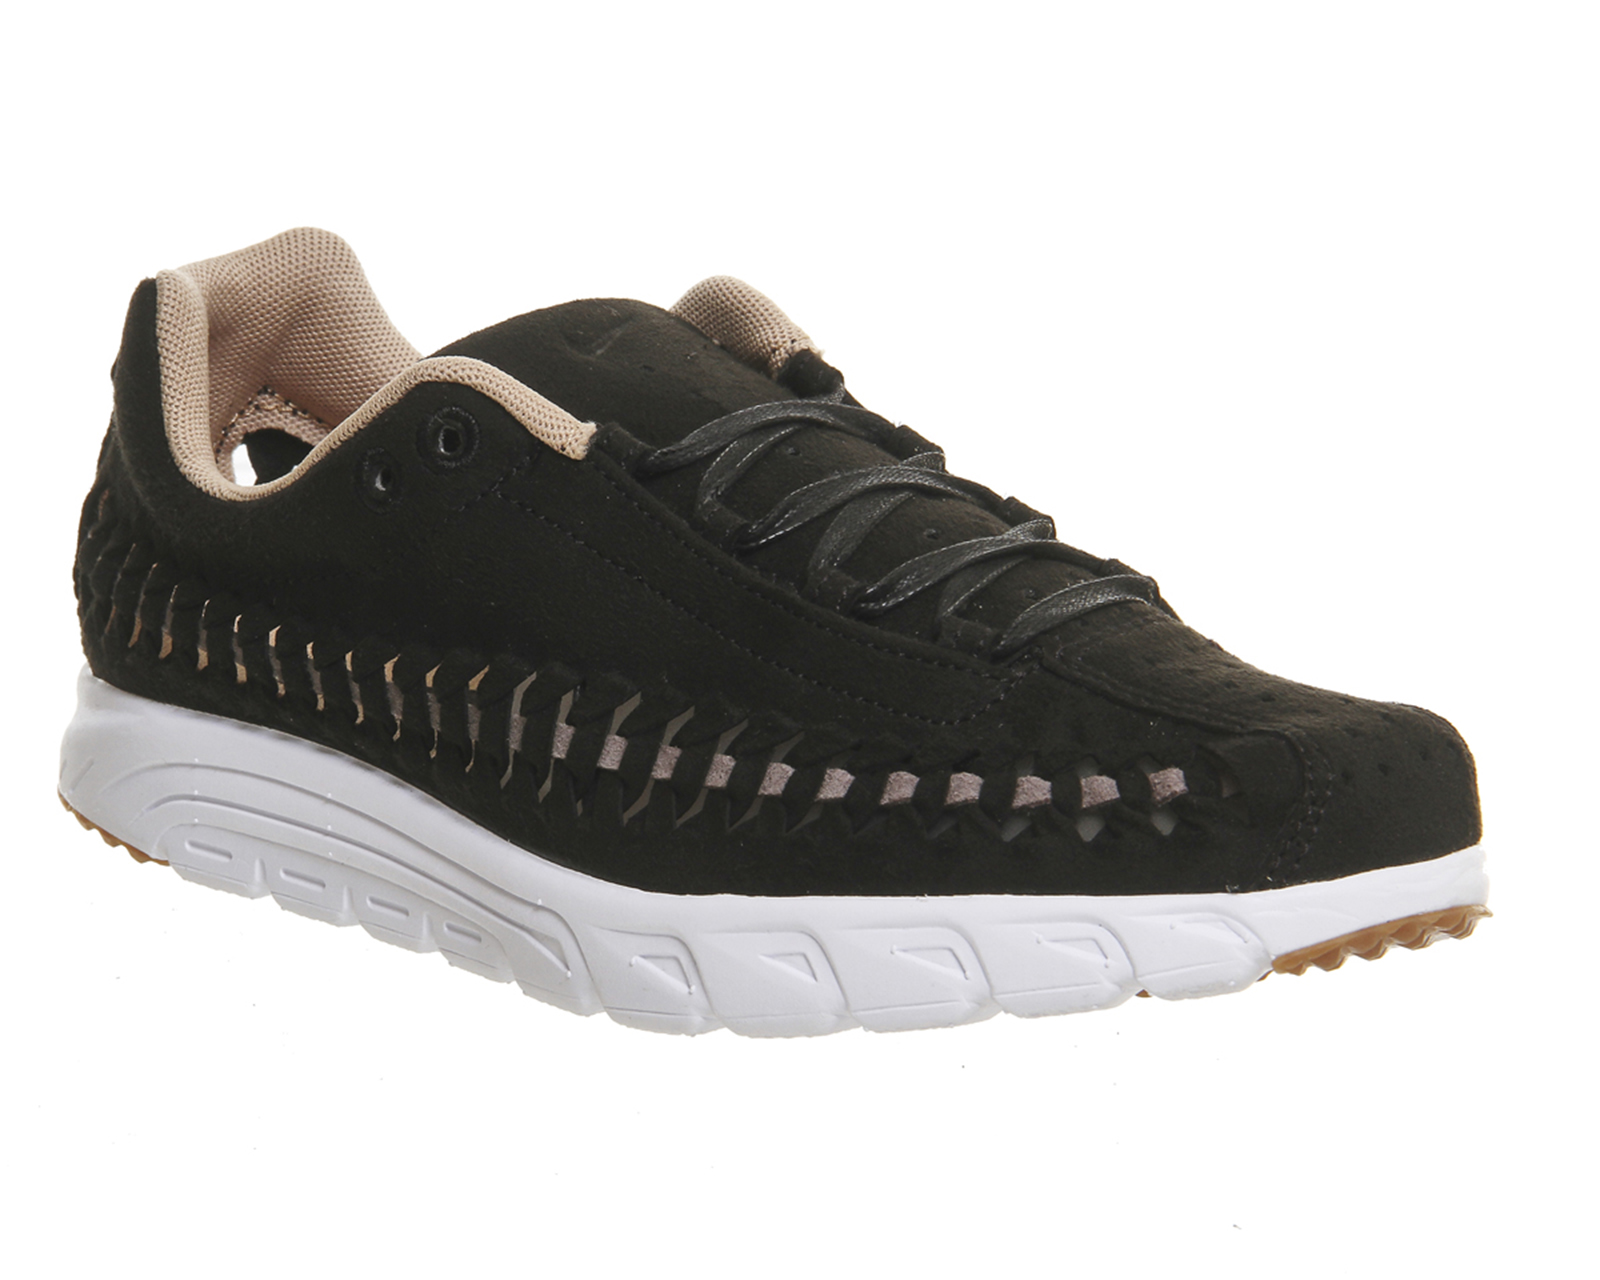 ladies mayfly trainers